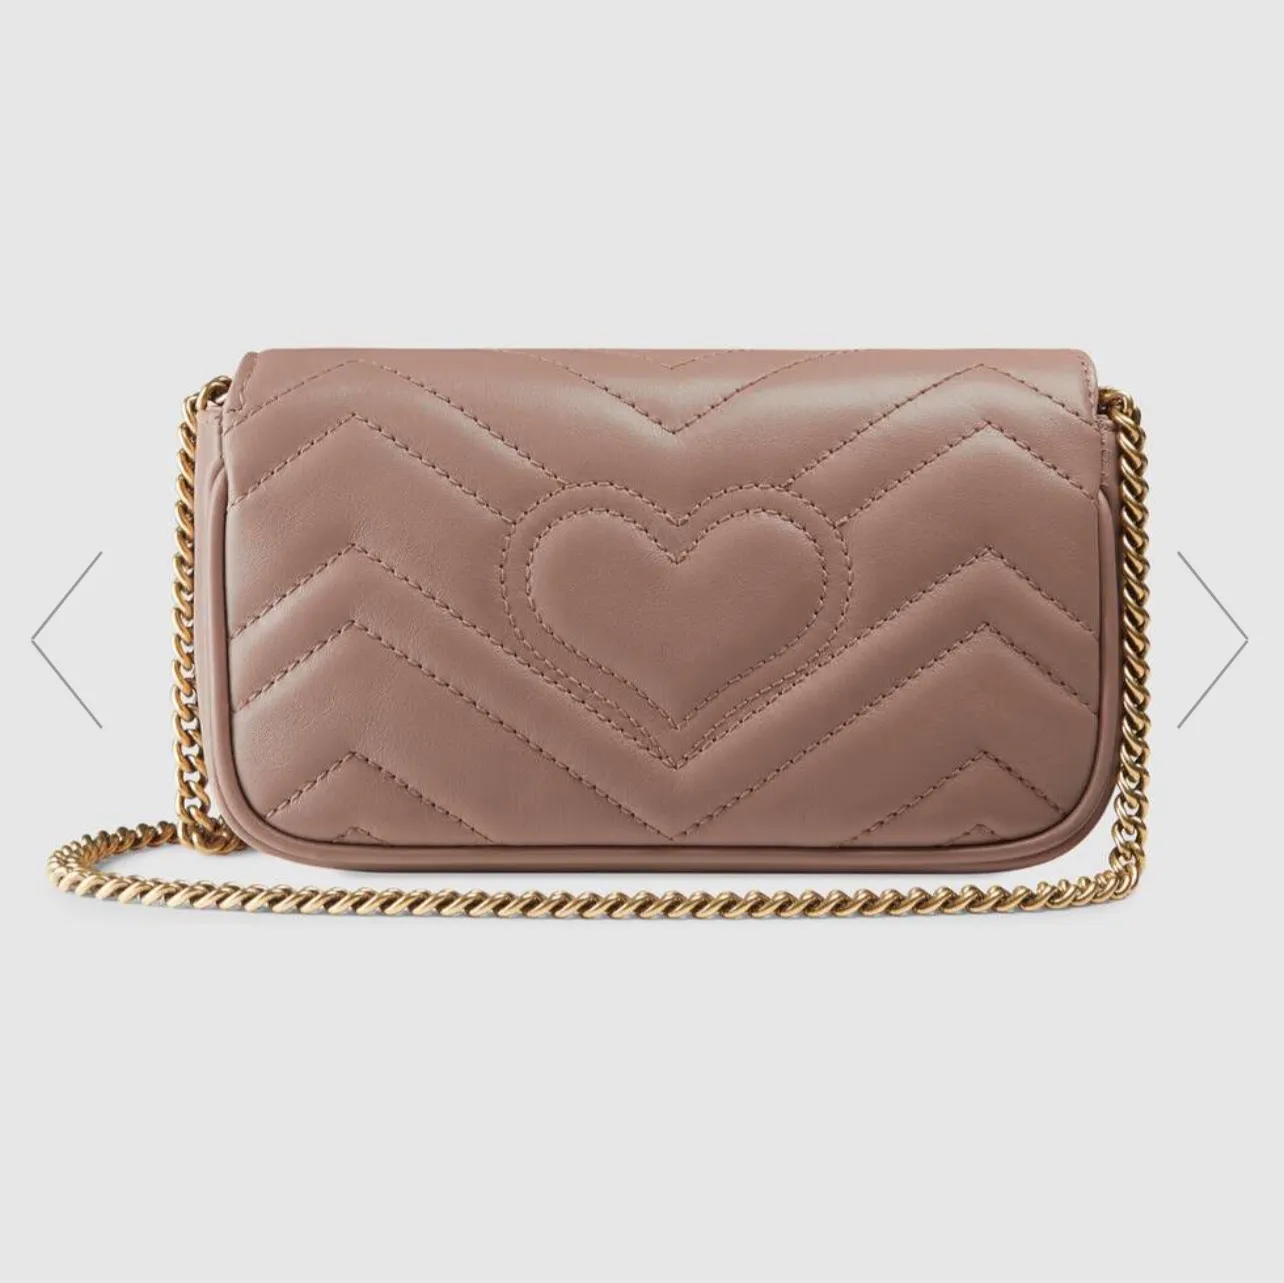 Marmont Chevron Leather Super Mini Bag Key Ring Inside Attachable to Big Tote Softly Structured Shape Flap Closure with Double Let265a